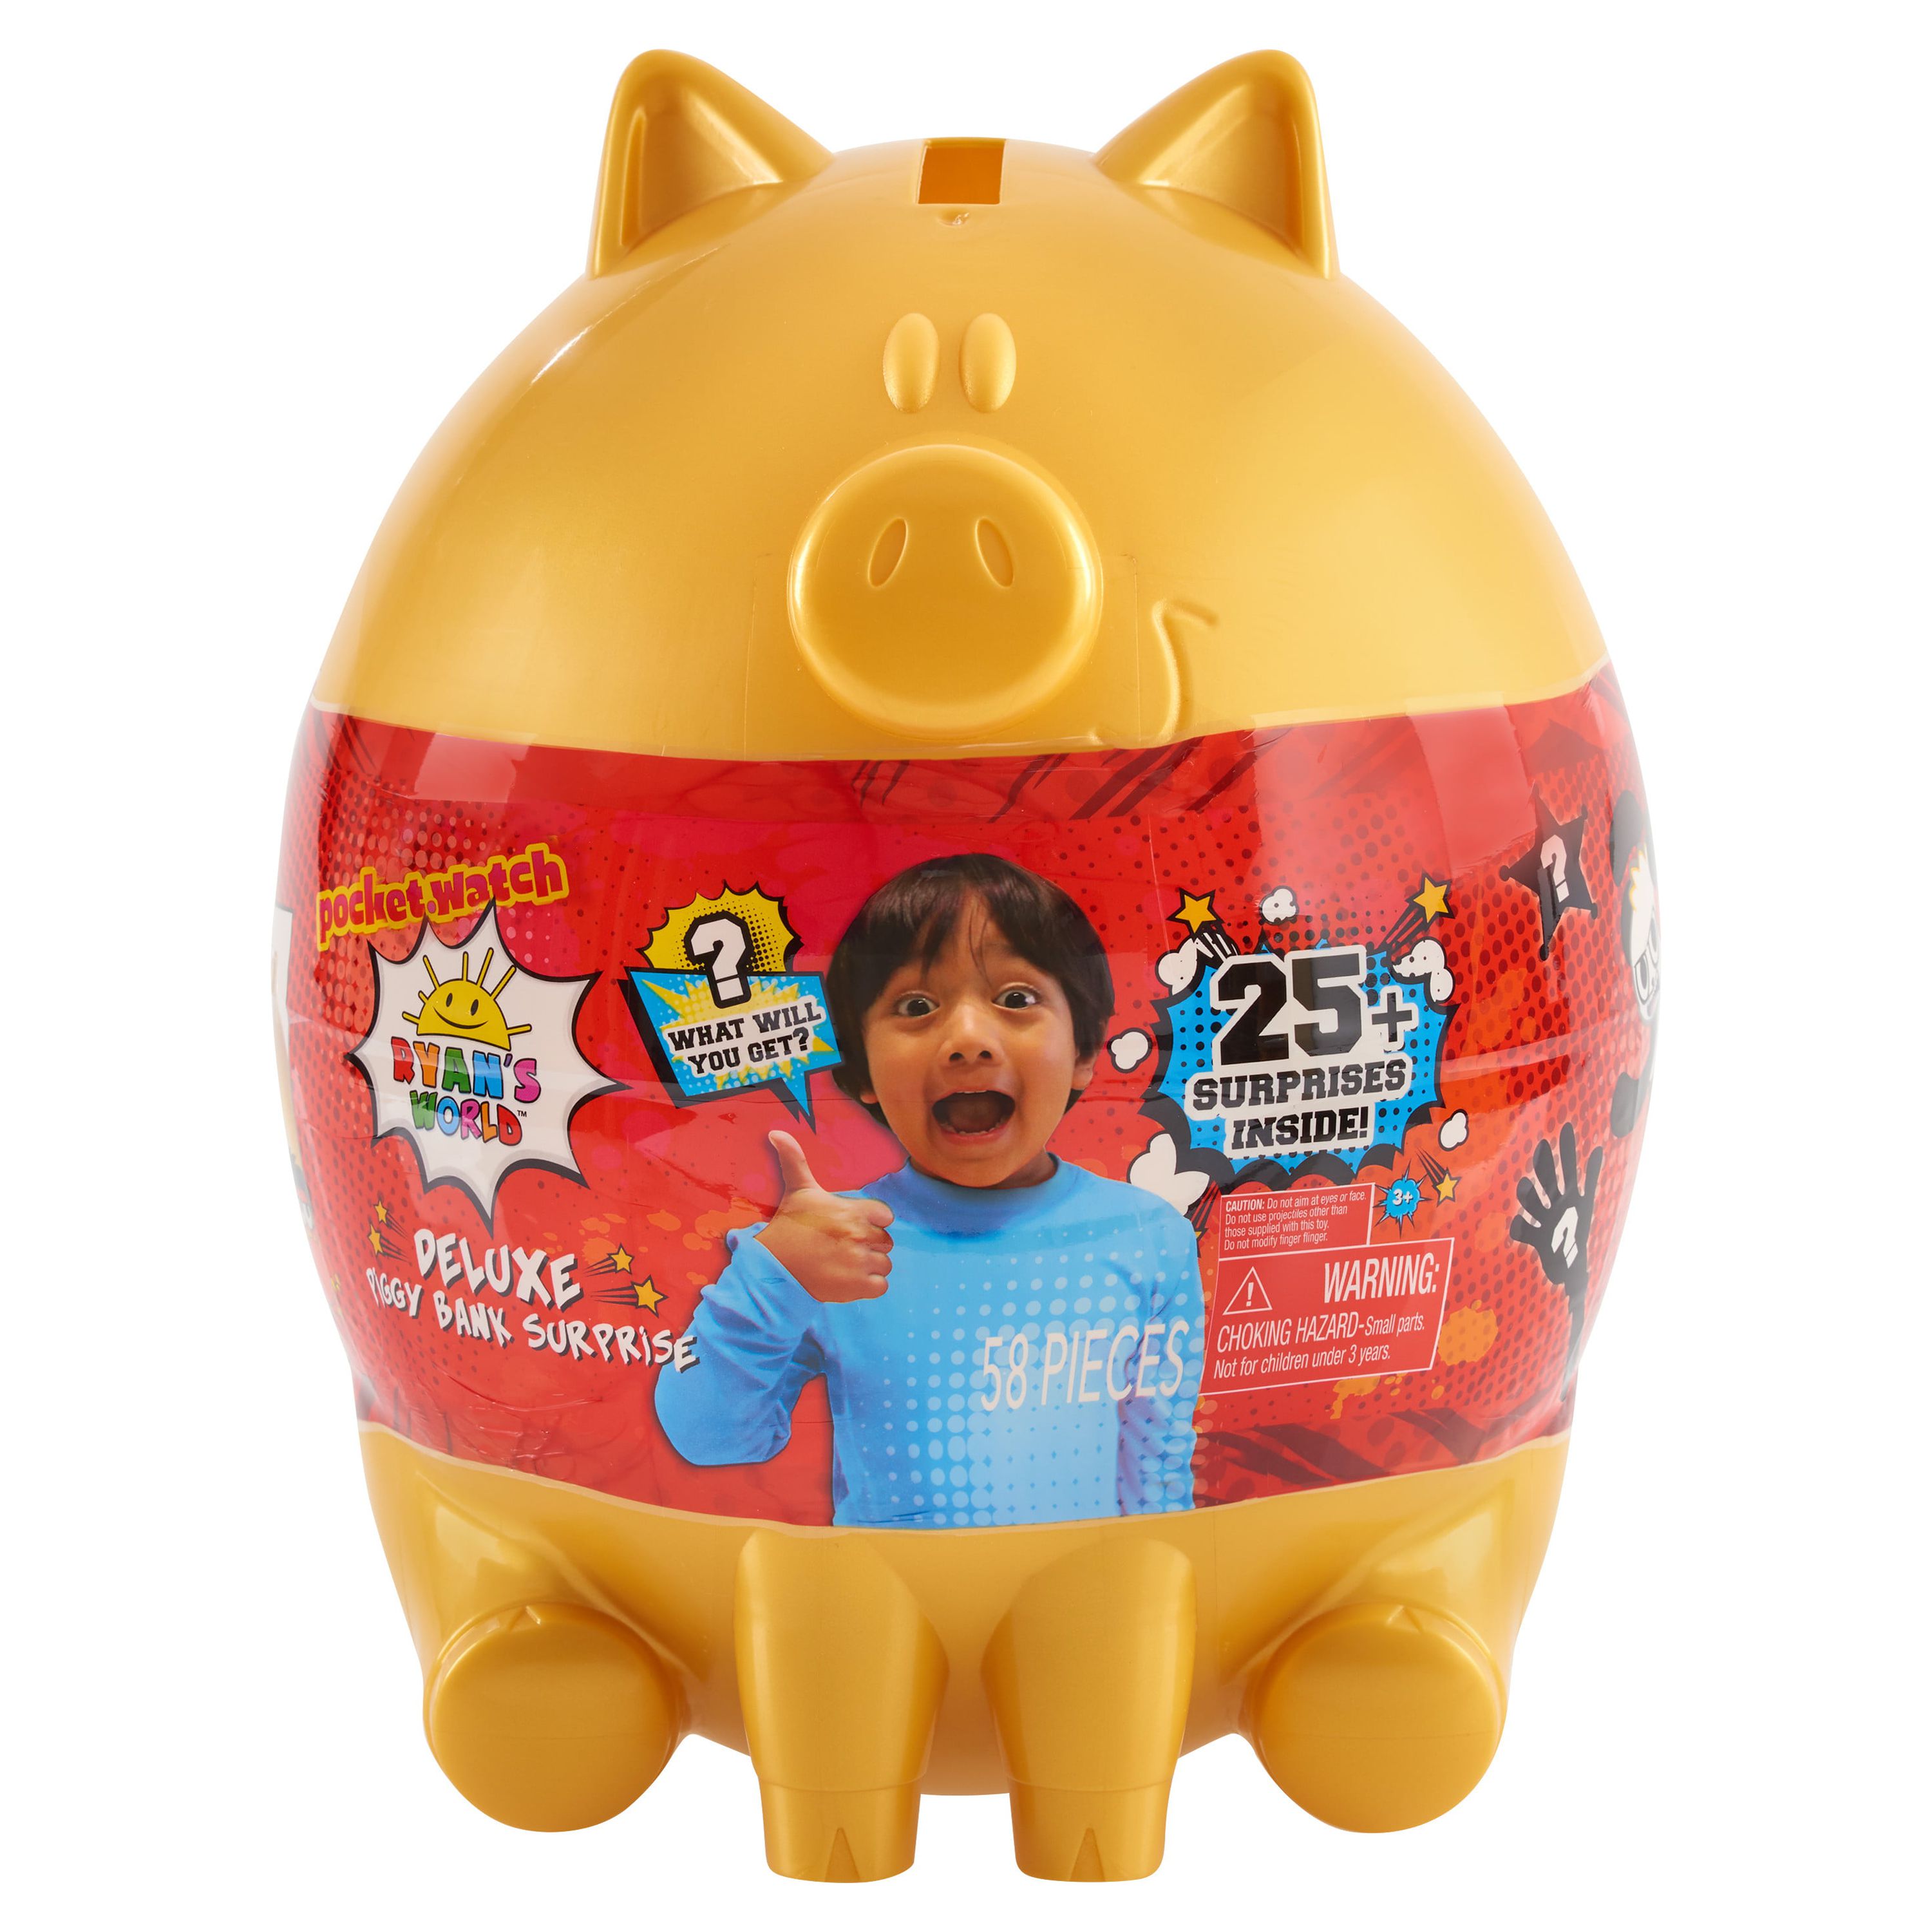 Ryan's World Deluxe Piggy Bank,  Kids Toys for Ages 3 Up, Gifts and Presents - image 1 of 3